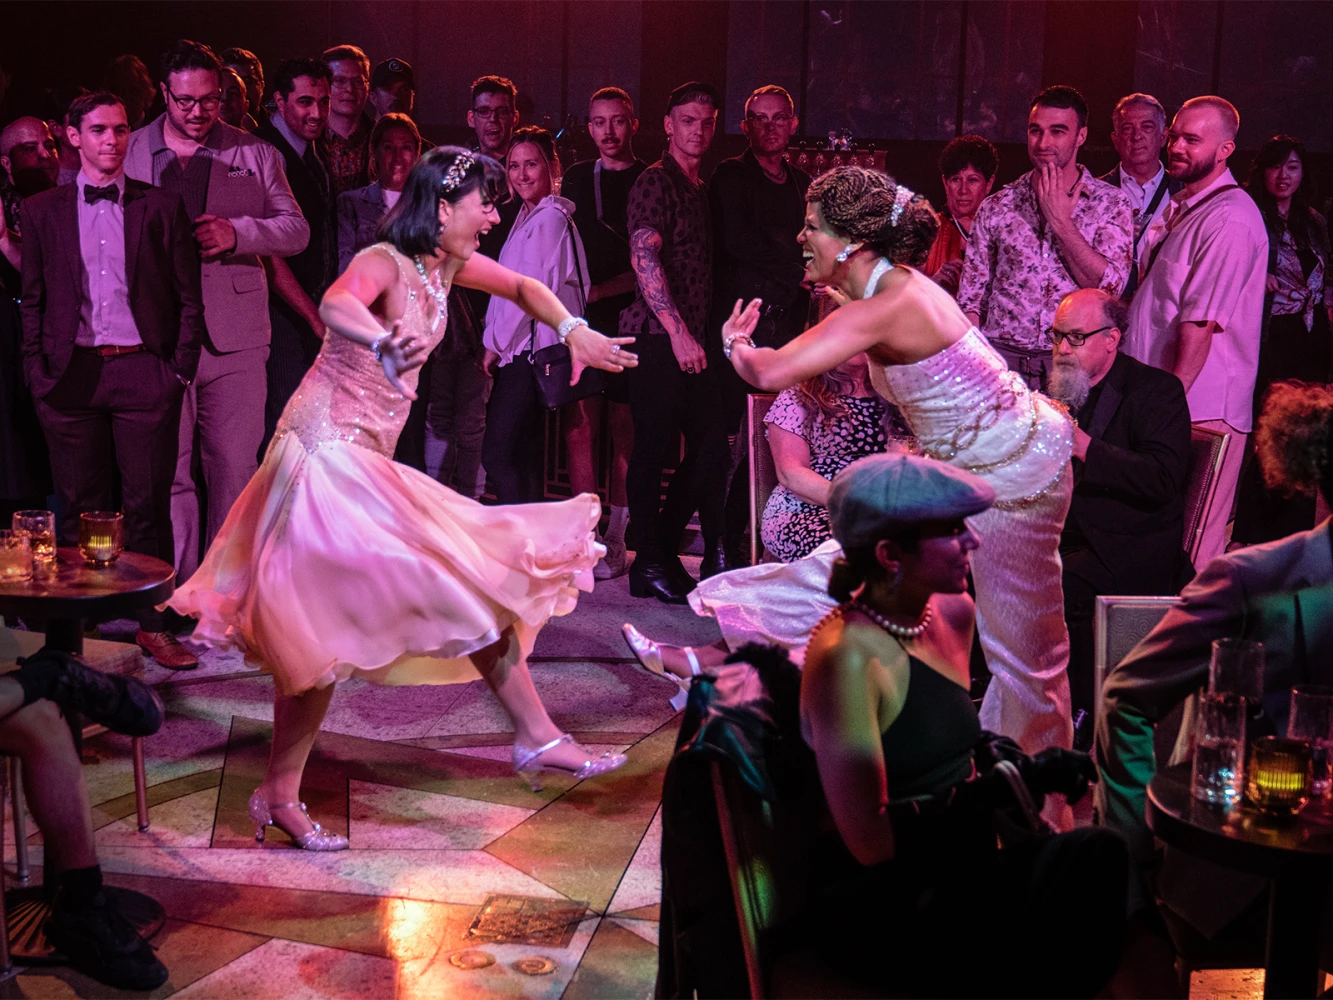 The Great Gatsby: The Immersive Show: What to expect - 6